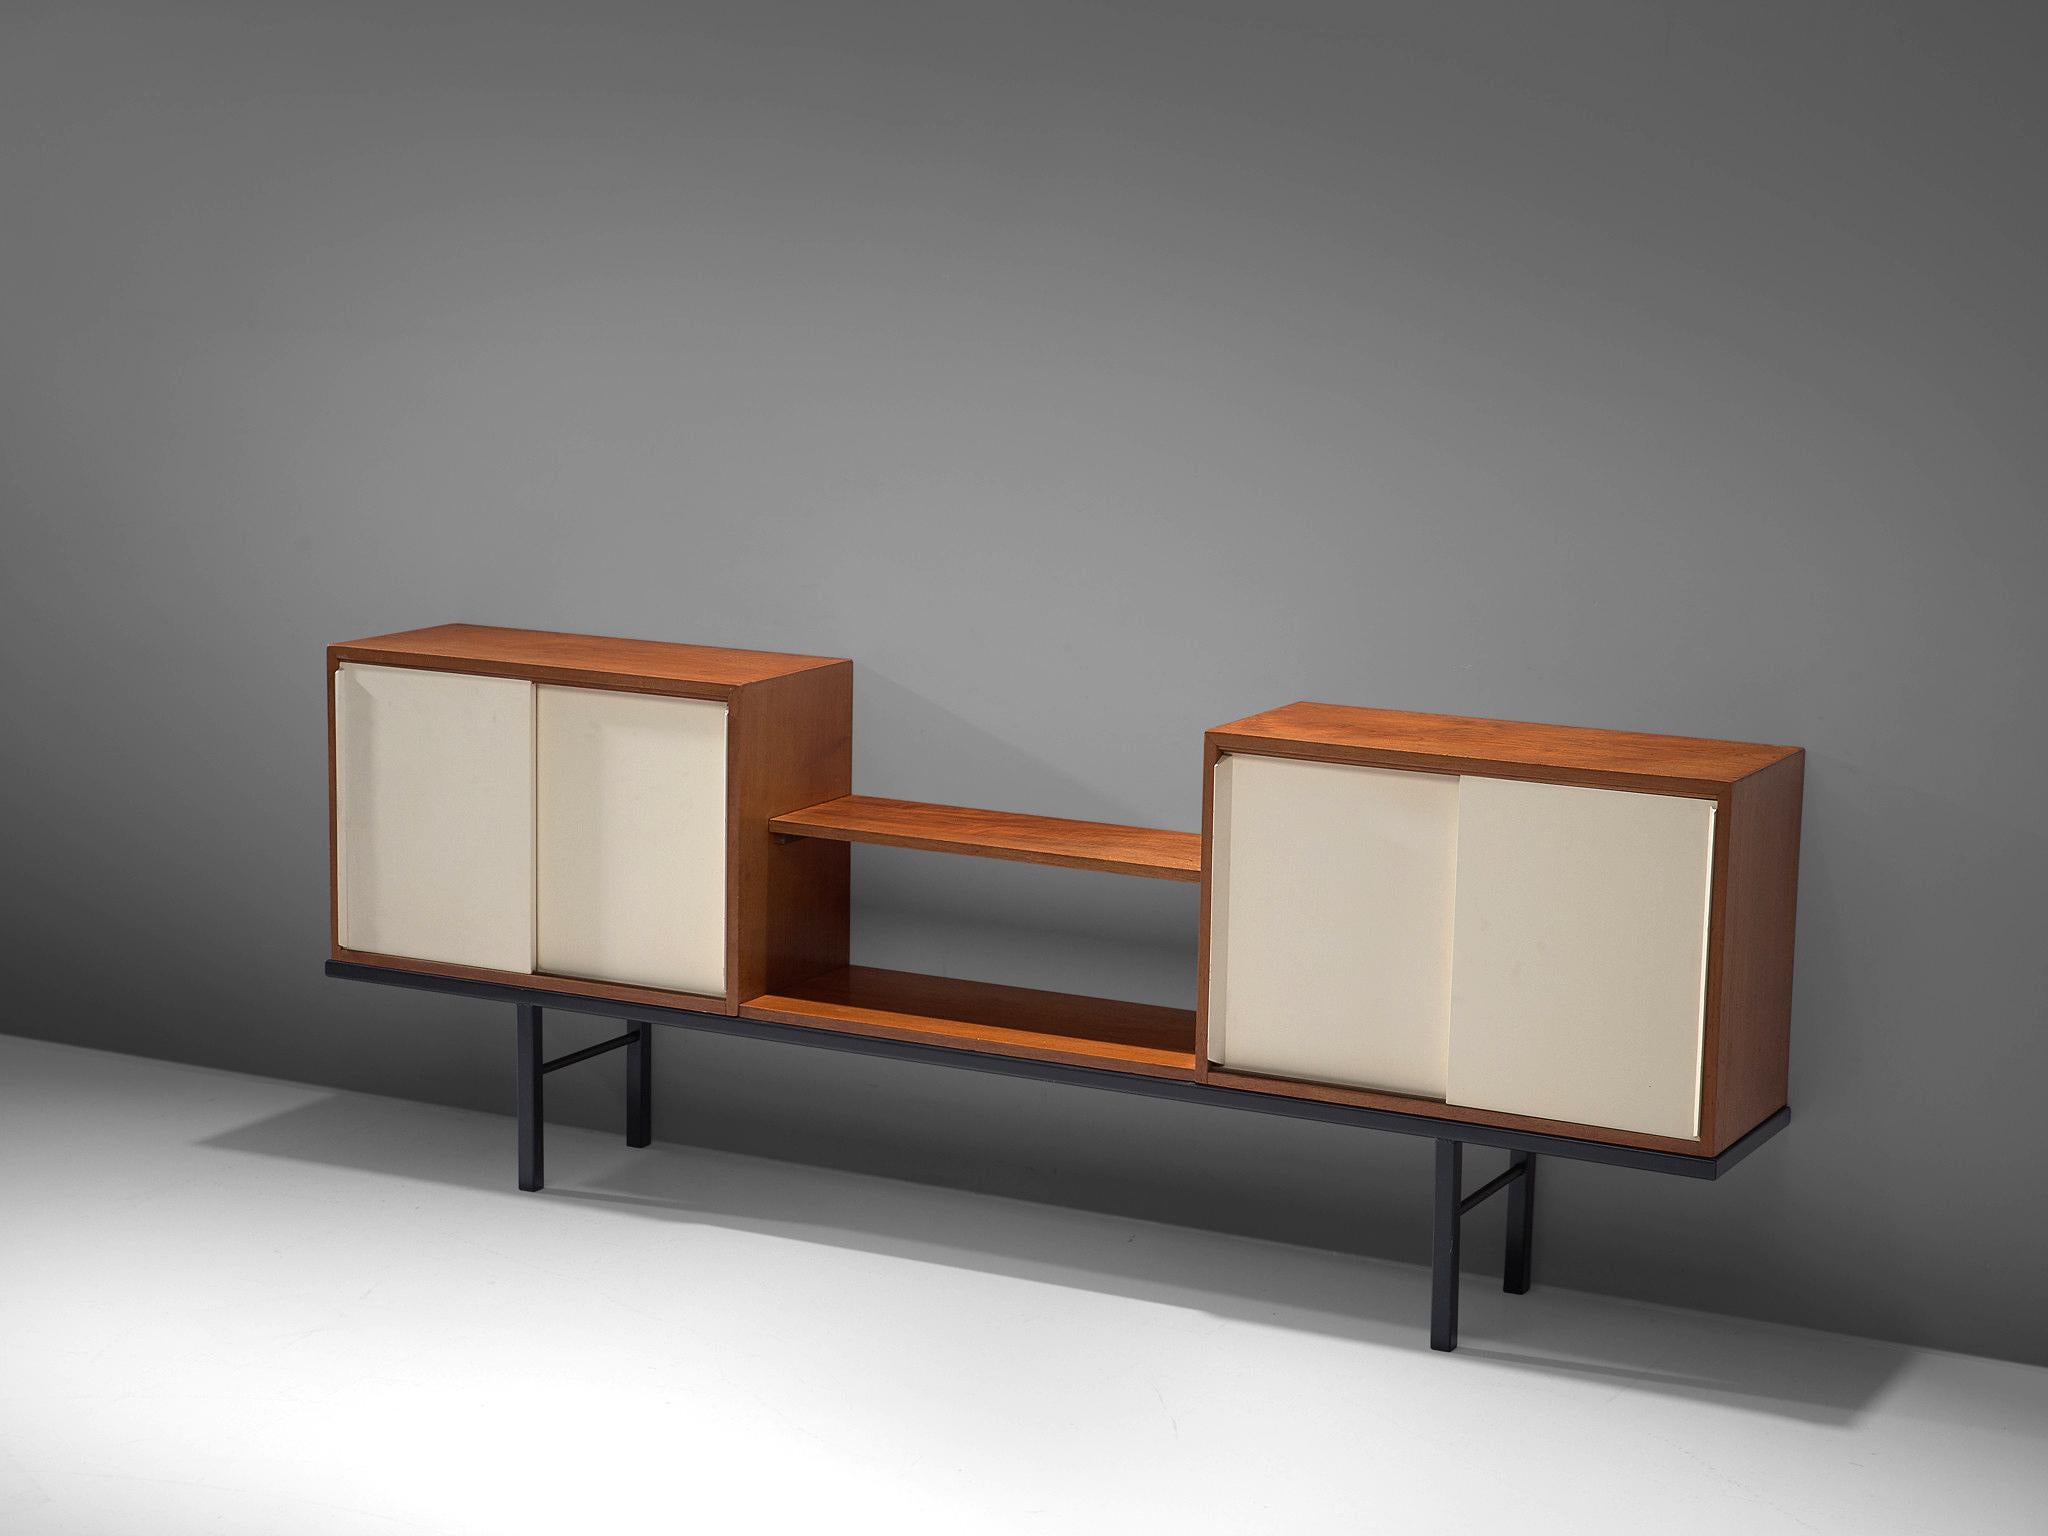 Martin Visser for 't Spectrum, pair of sideboards, Bornholm collection KW63, wood, metal, and glass, the Netherlands, 1956-1959.

This rare sideboard is executed in mixed materials. The credenza features a Minimalist black metal base and two